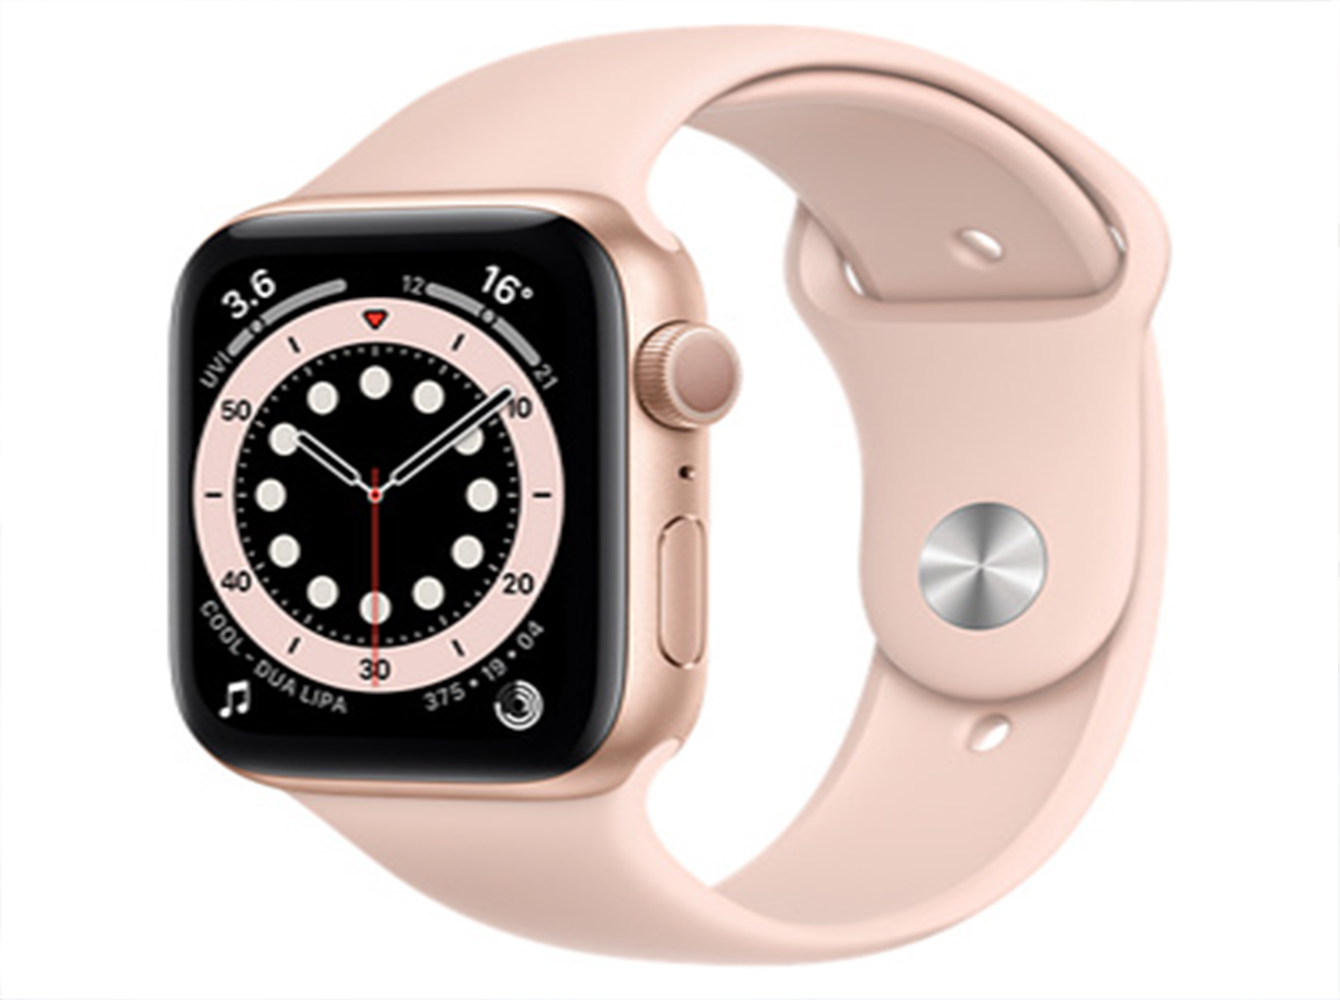 Watch series 9 45mm aluminium. Watch Series 6 40mm Red. Apple watch Series 9 GPS 45 mm Aluminium Case with Sport Band Black. Часы Apple watch Series 8 GPS 45mm Aluminum Case with Sport Band (темная ночь). Apple watch se Gen 2 GPS 44mm Aluminium Case with Sport Band бежевый.